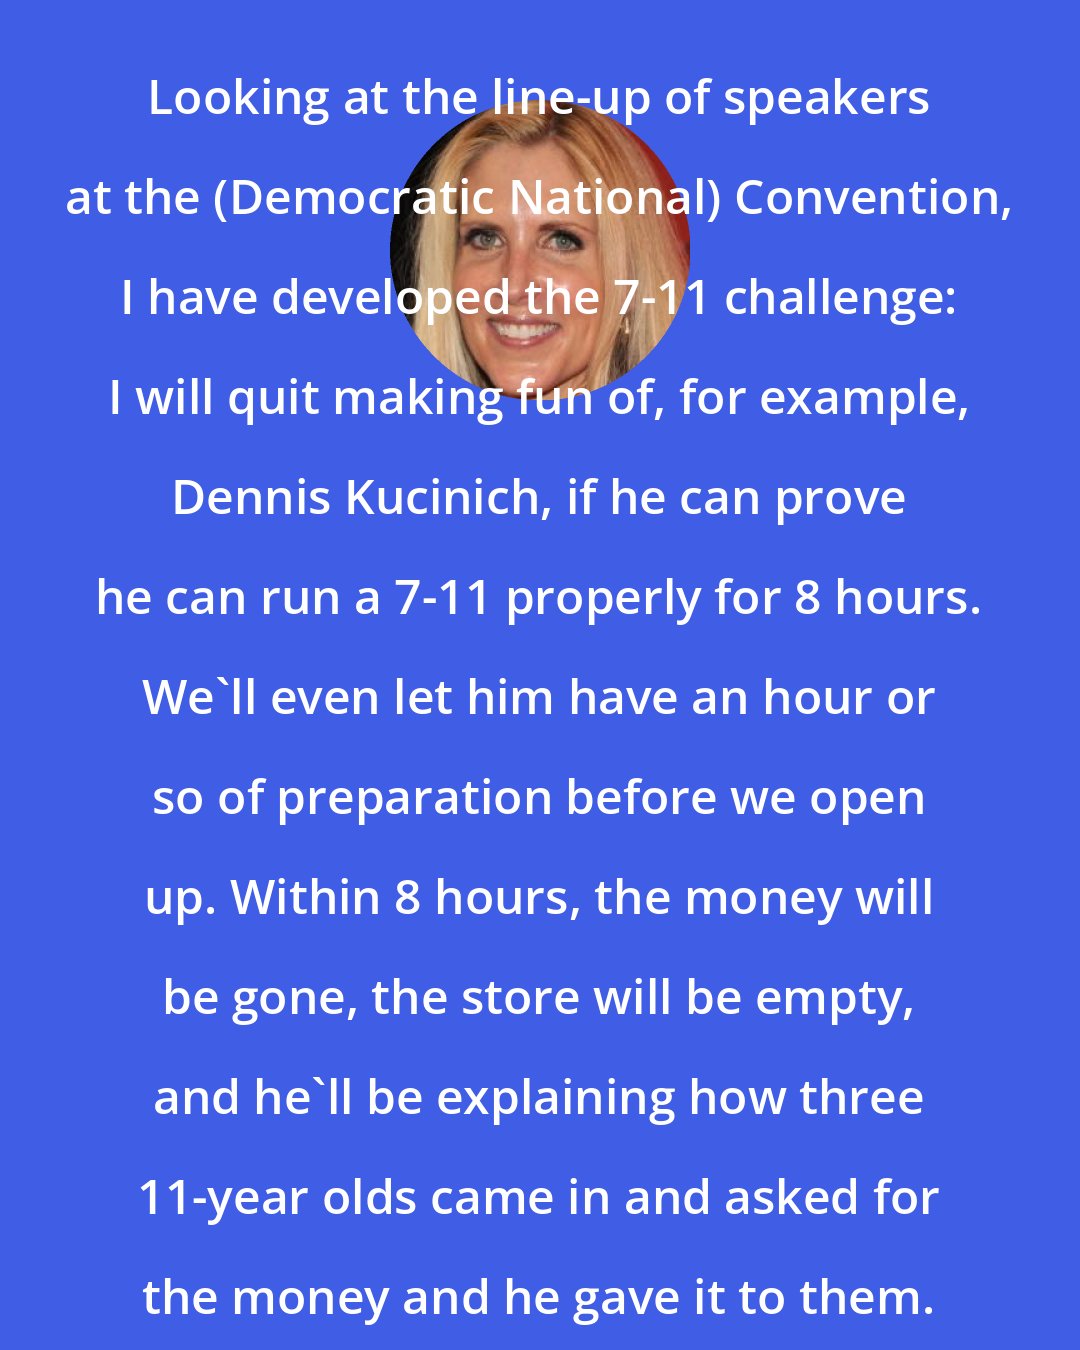 Ann Coulter: Looking at the line-up of speakers at the (Democratic National) Convention, I have developed the 7-11 challenge: I will quit making fun of, for example, Dennis Kucinich, if he can prove he can run a 7-11 properly for 8 hours. We'll even let him have an hour or so of preparation before we open up. Within 8 hours, the money will be gone, the store will be empty, and he'll be explaining how three 11-year olds came in and asked for the money and he gave it to them.